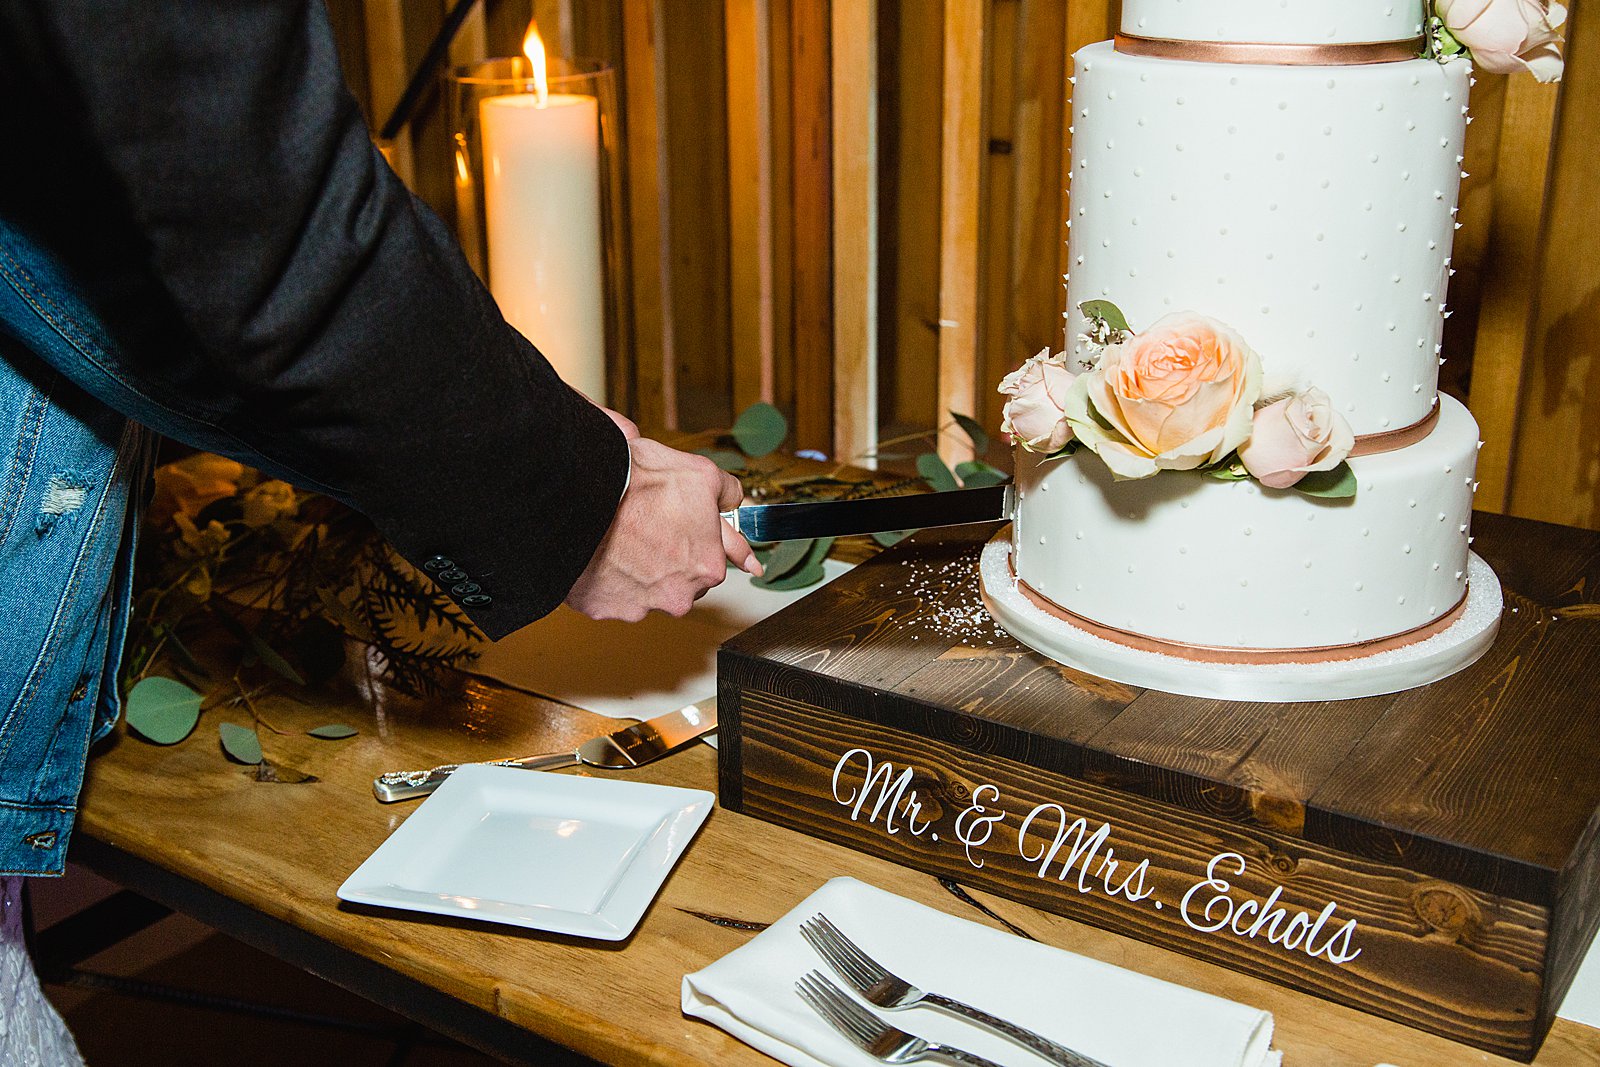 Bride and Groom cutting their wedding cake at their The Paseo wedding reception by Arizona wedding photographer PMA Photography.